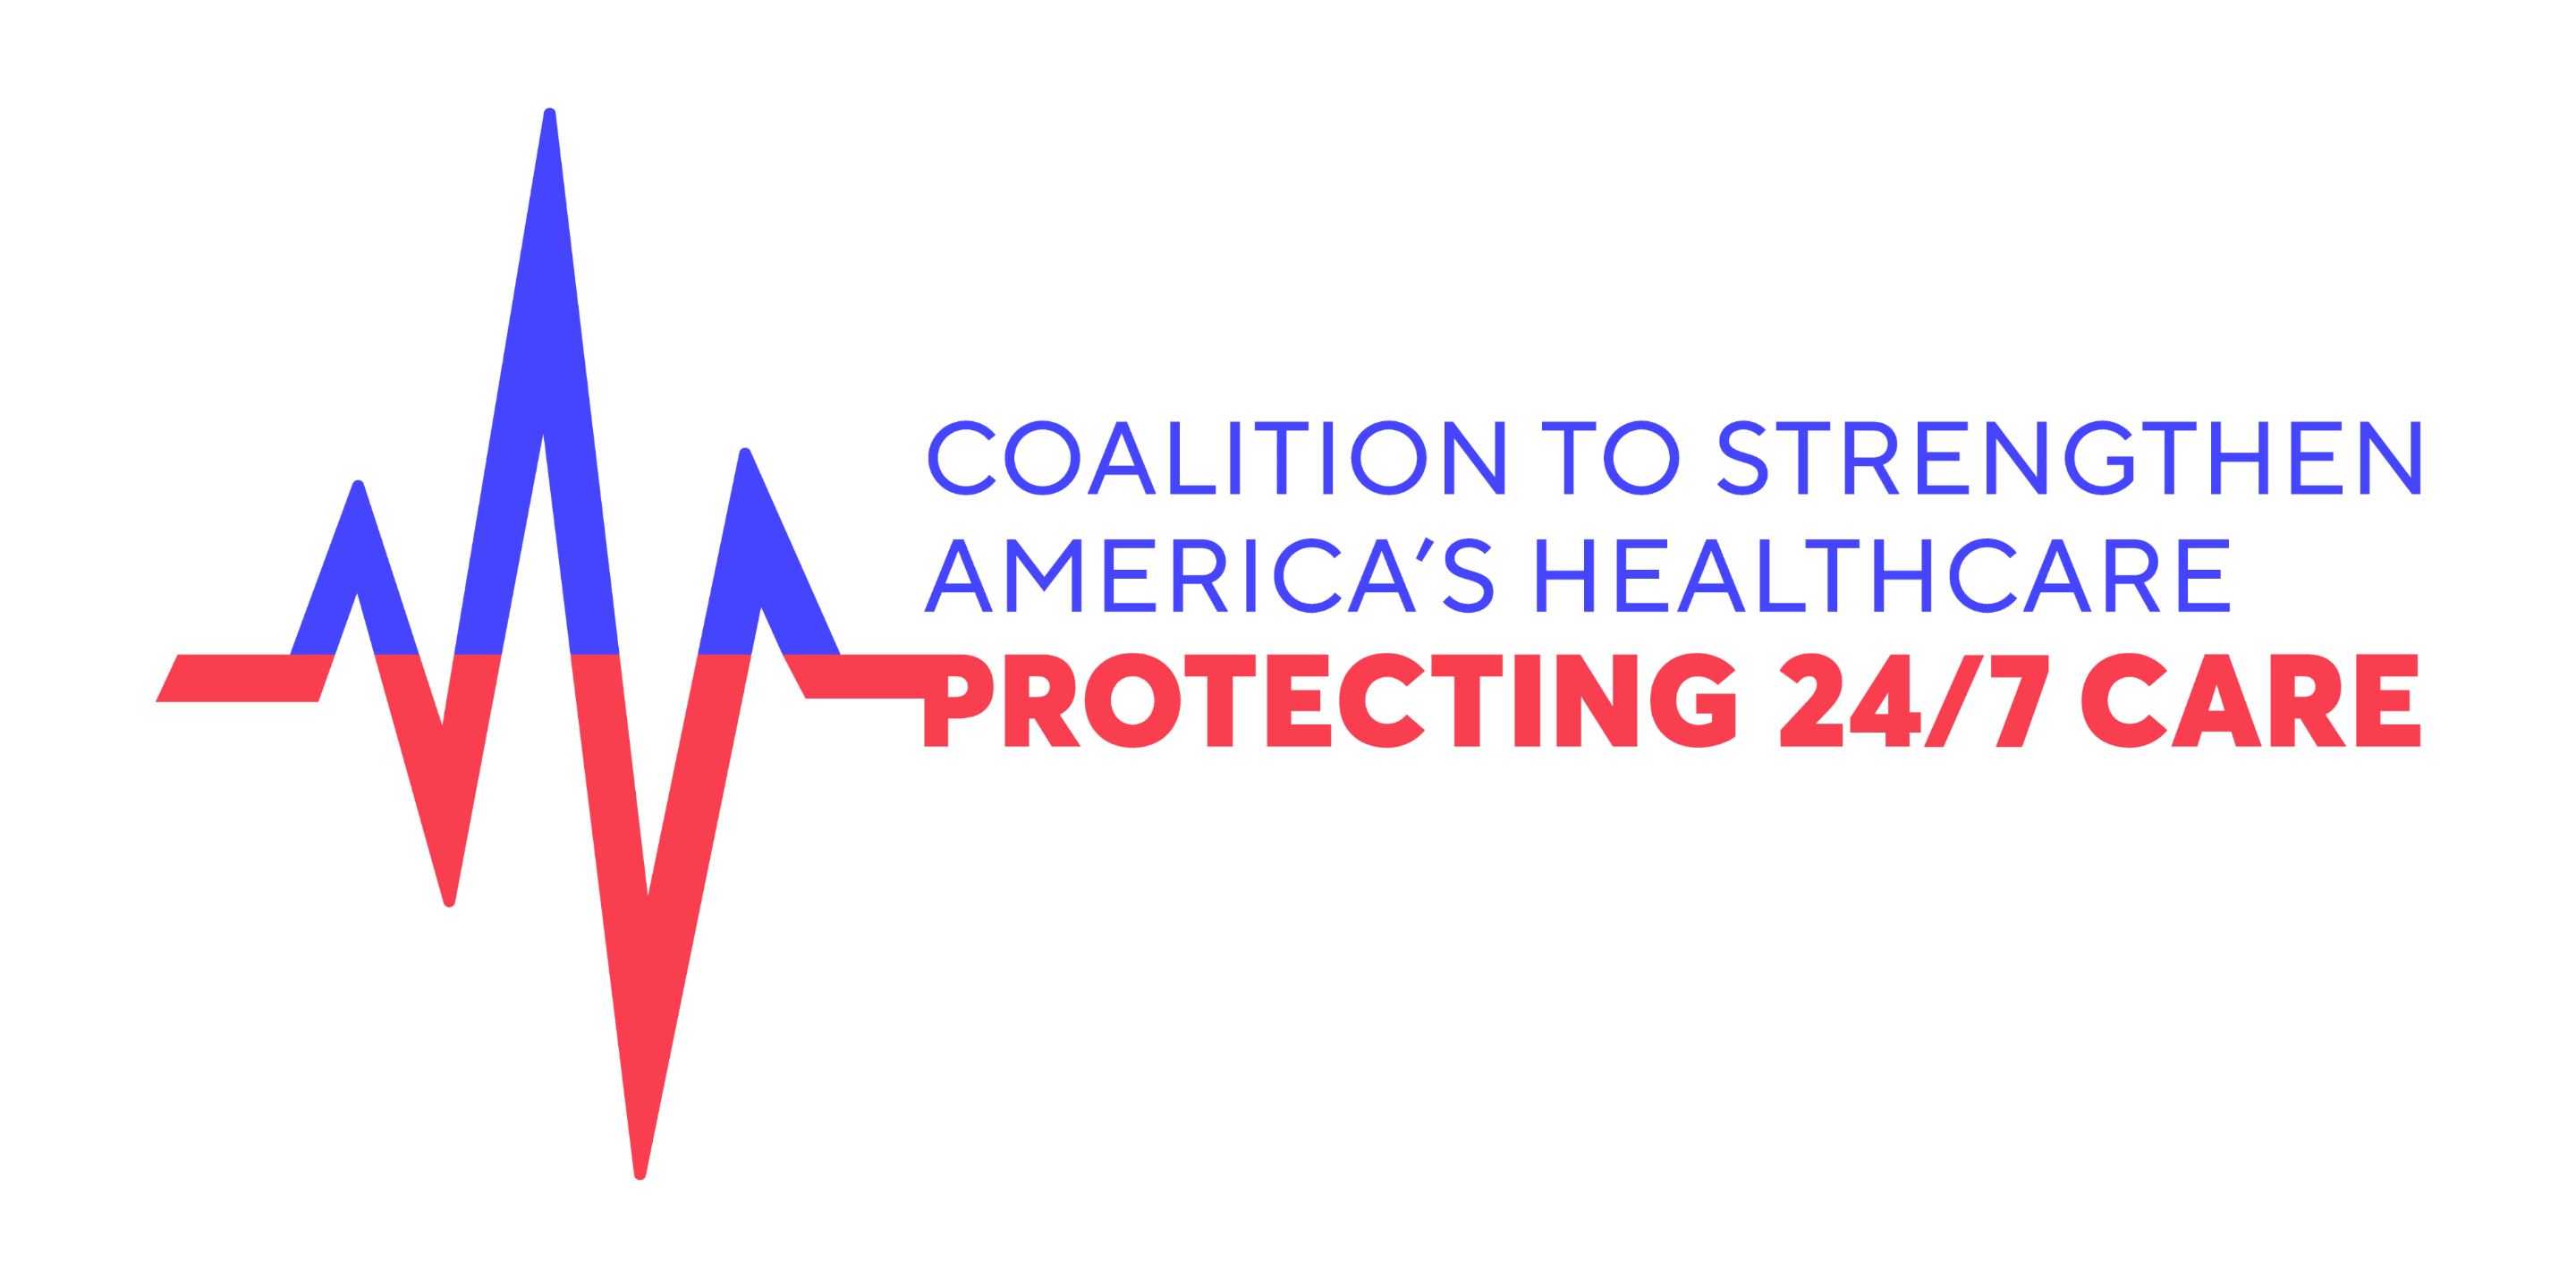 Coalition to Strengthen America's Healthcare